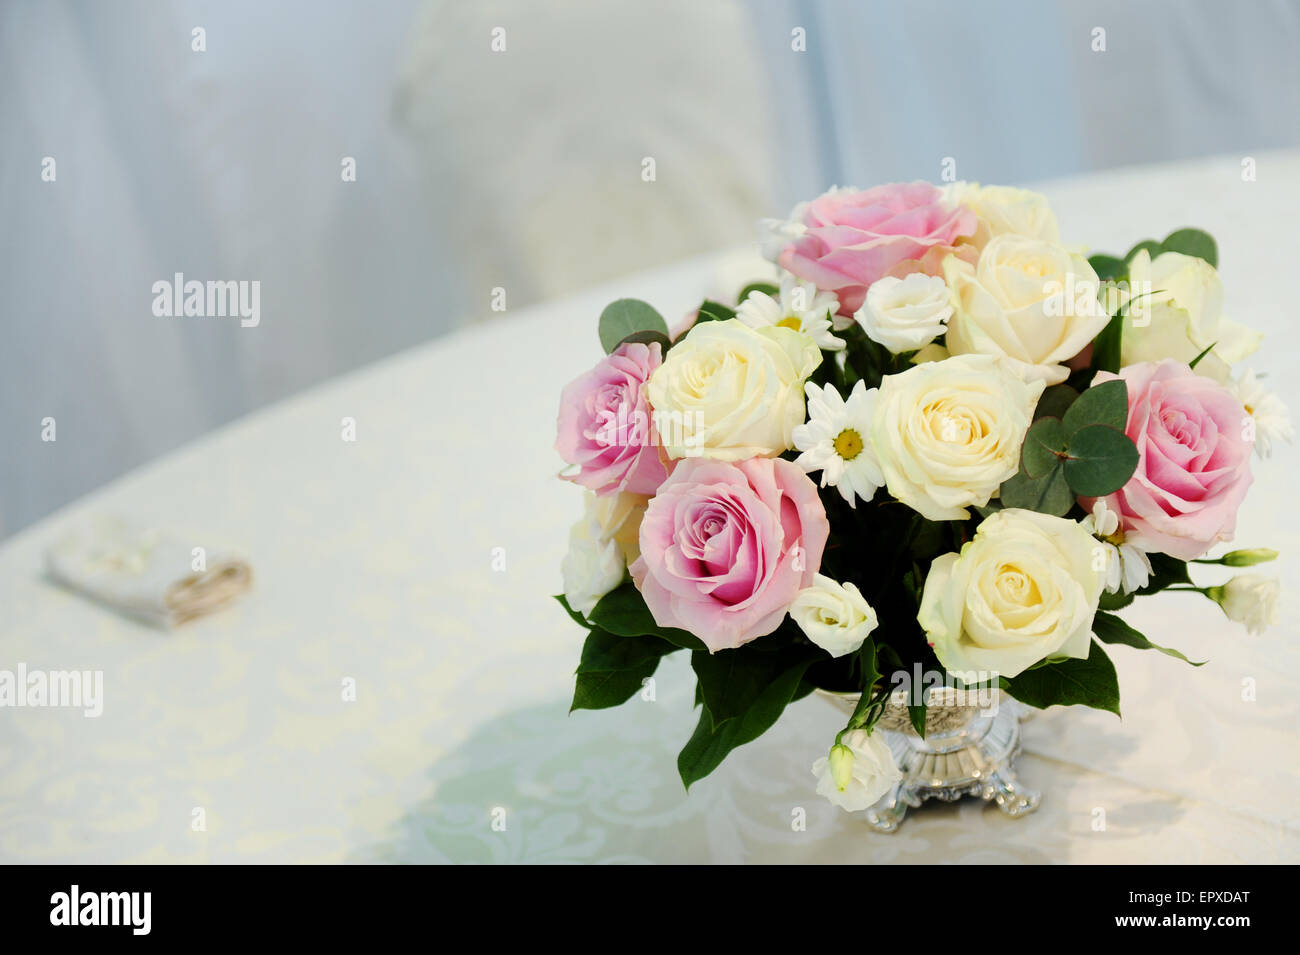 Wedding arrangement of a roses bouquet on a restaurant table Stock Photo